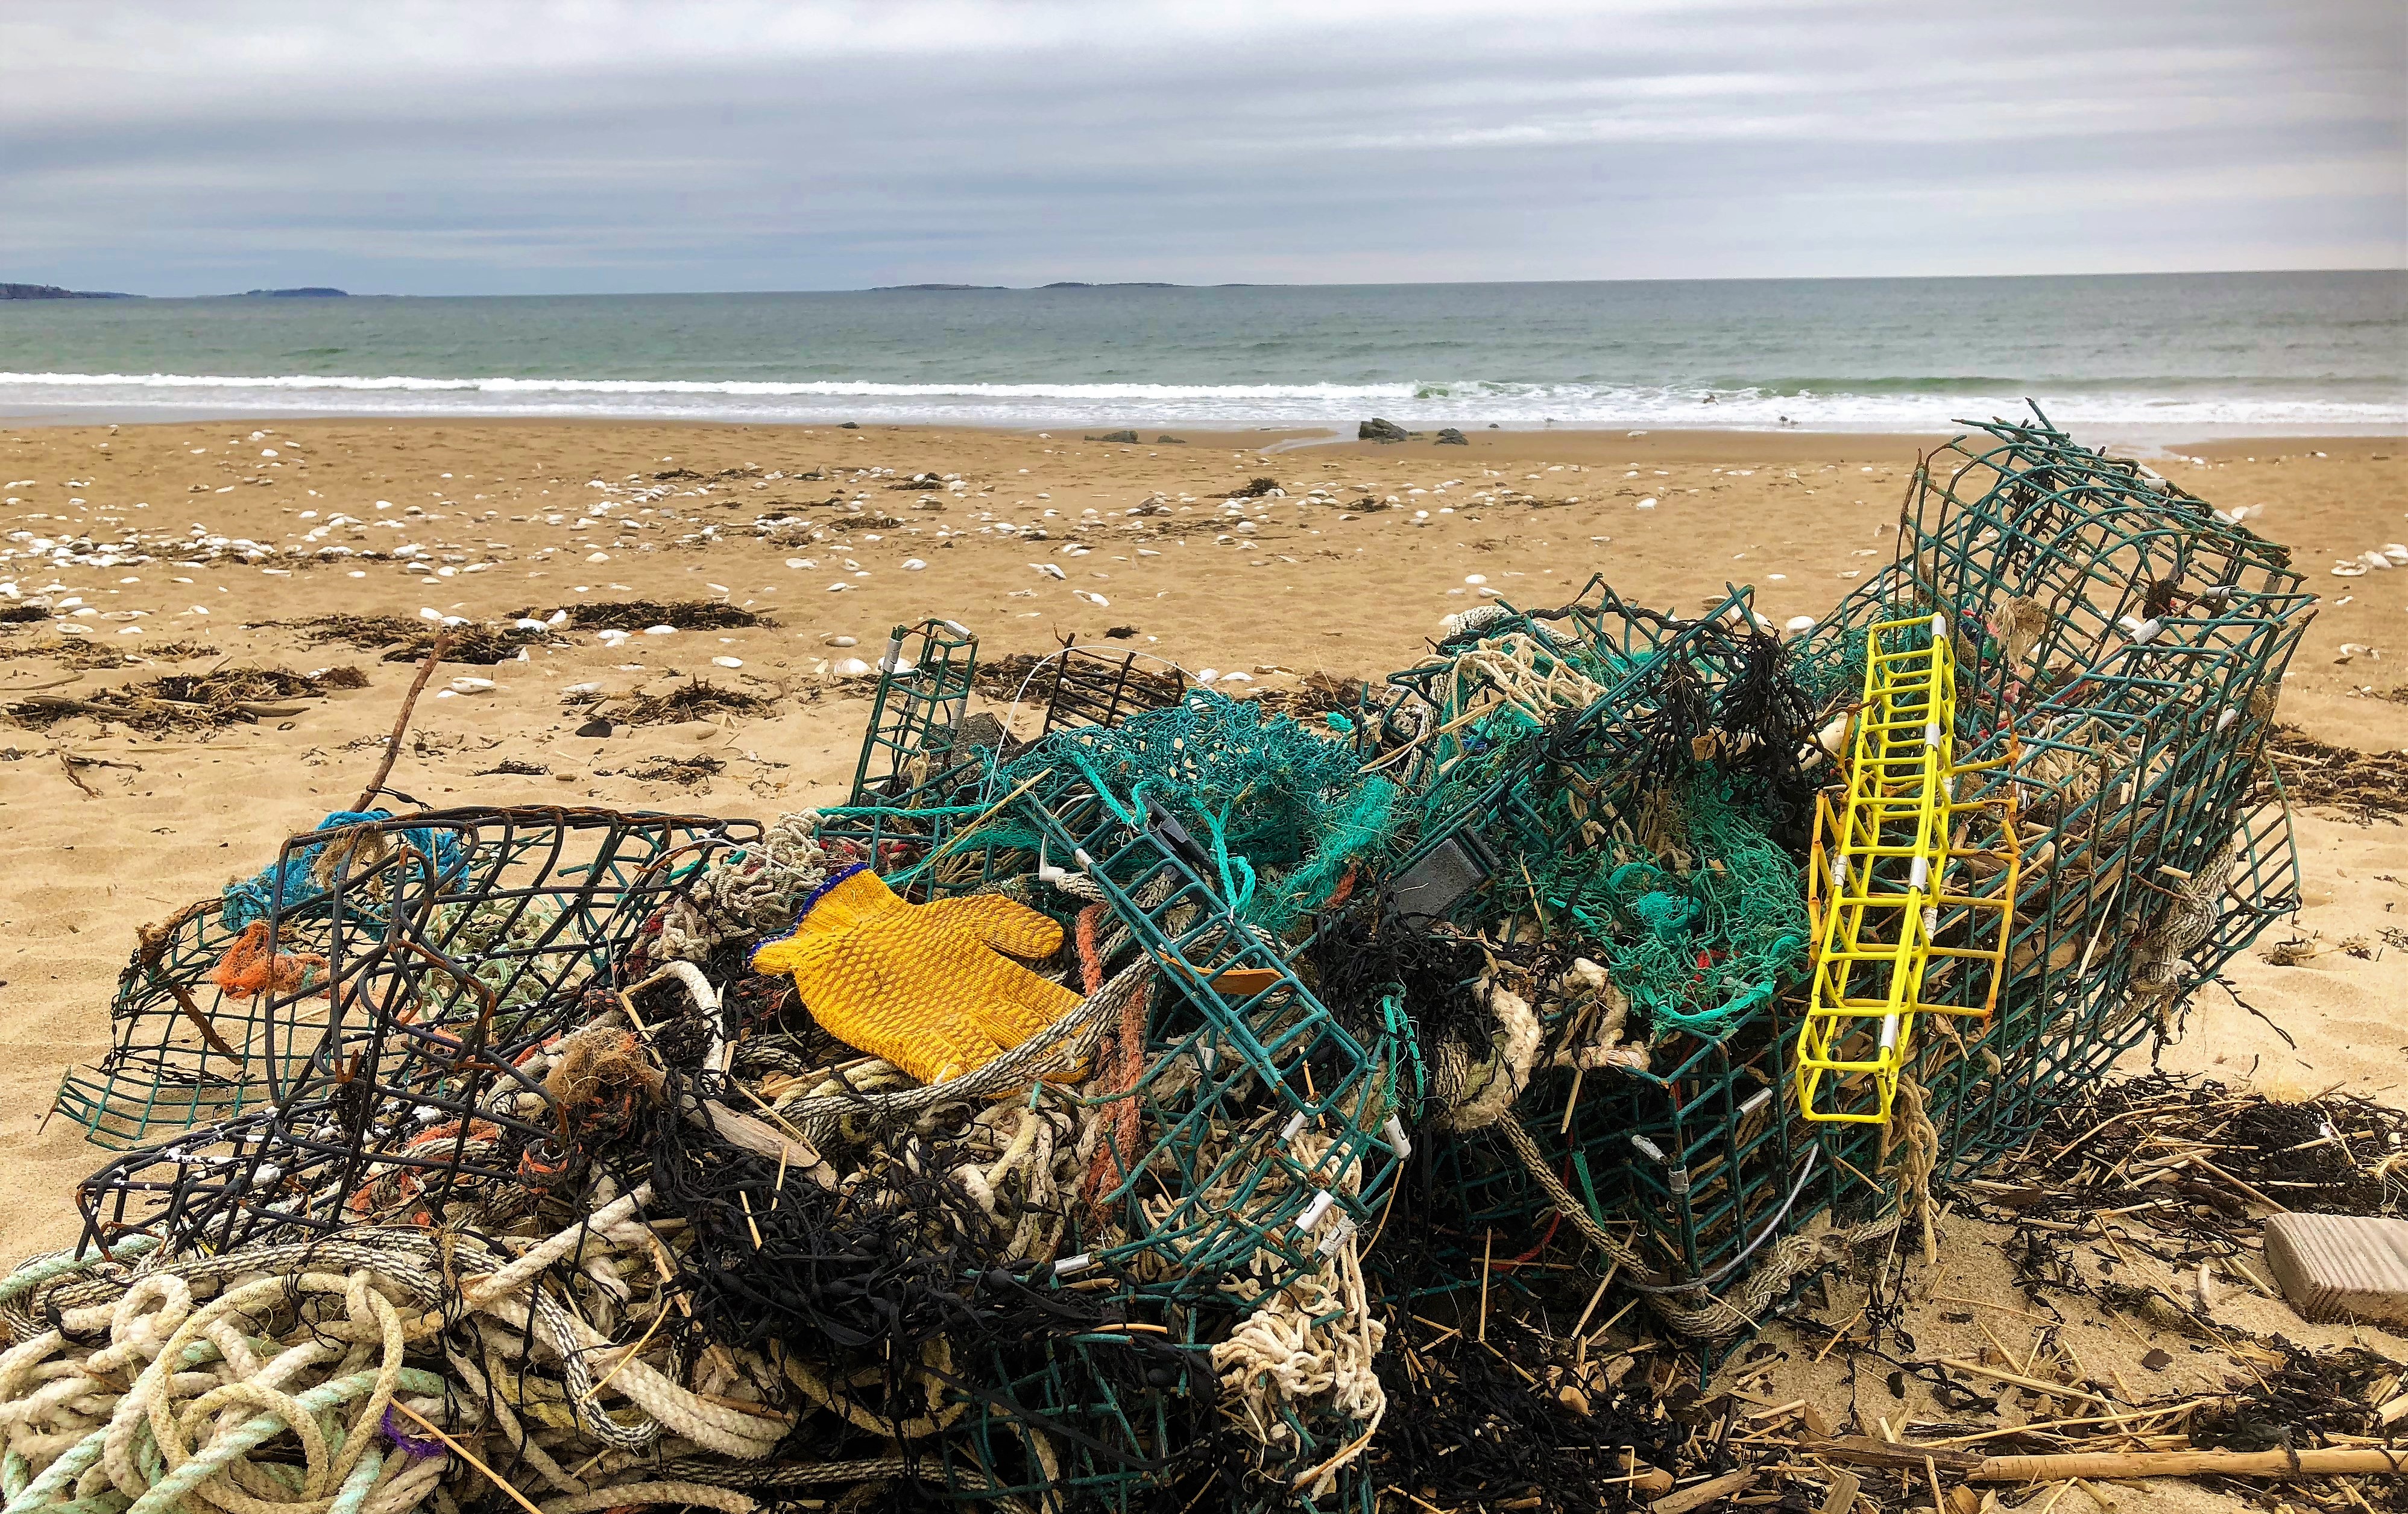 A tangled pile of derelict fishing gear on the shoreline.